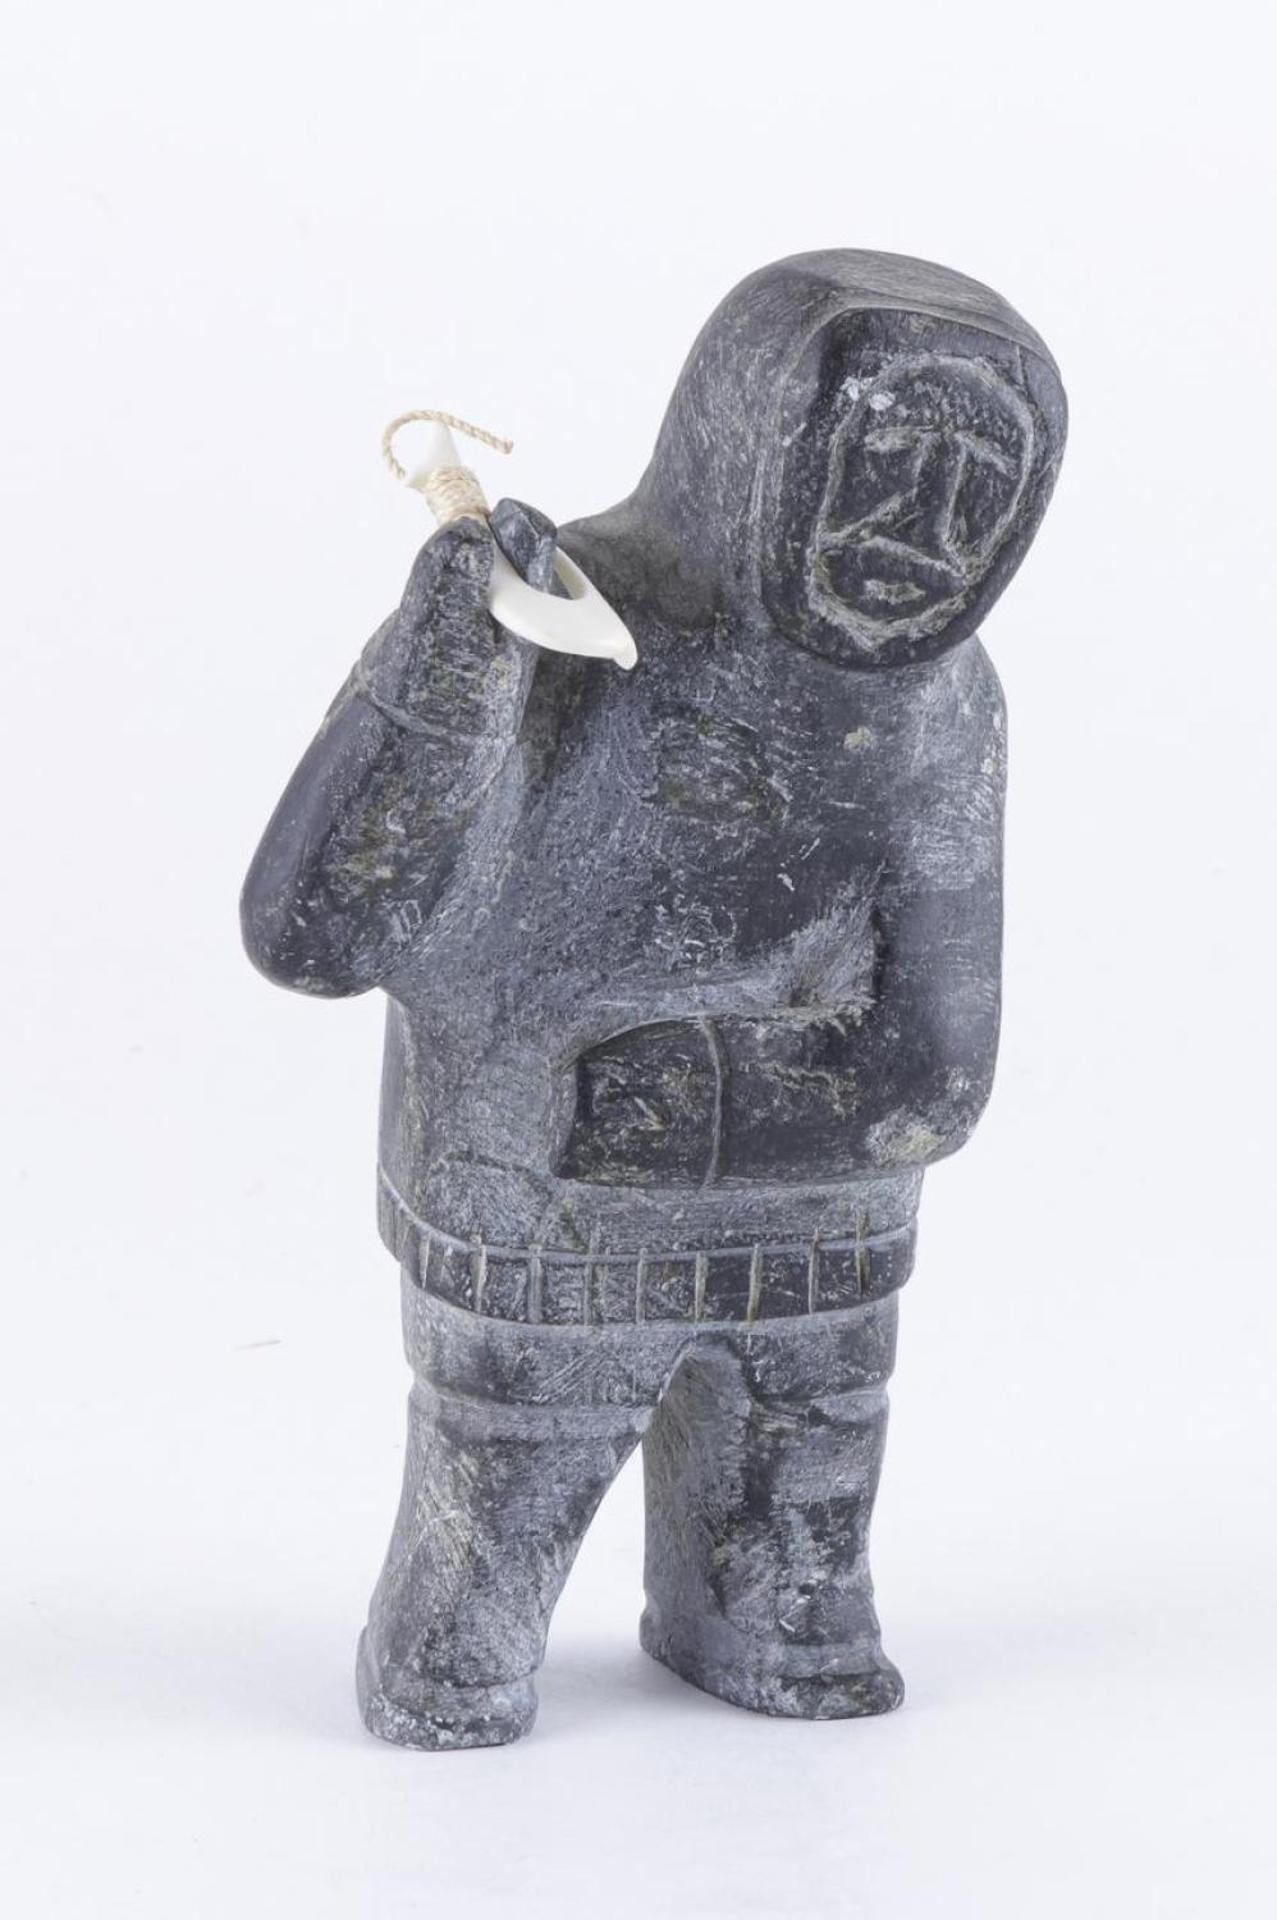 Jos - a black stone carving of a hunter